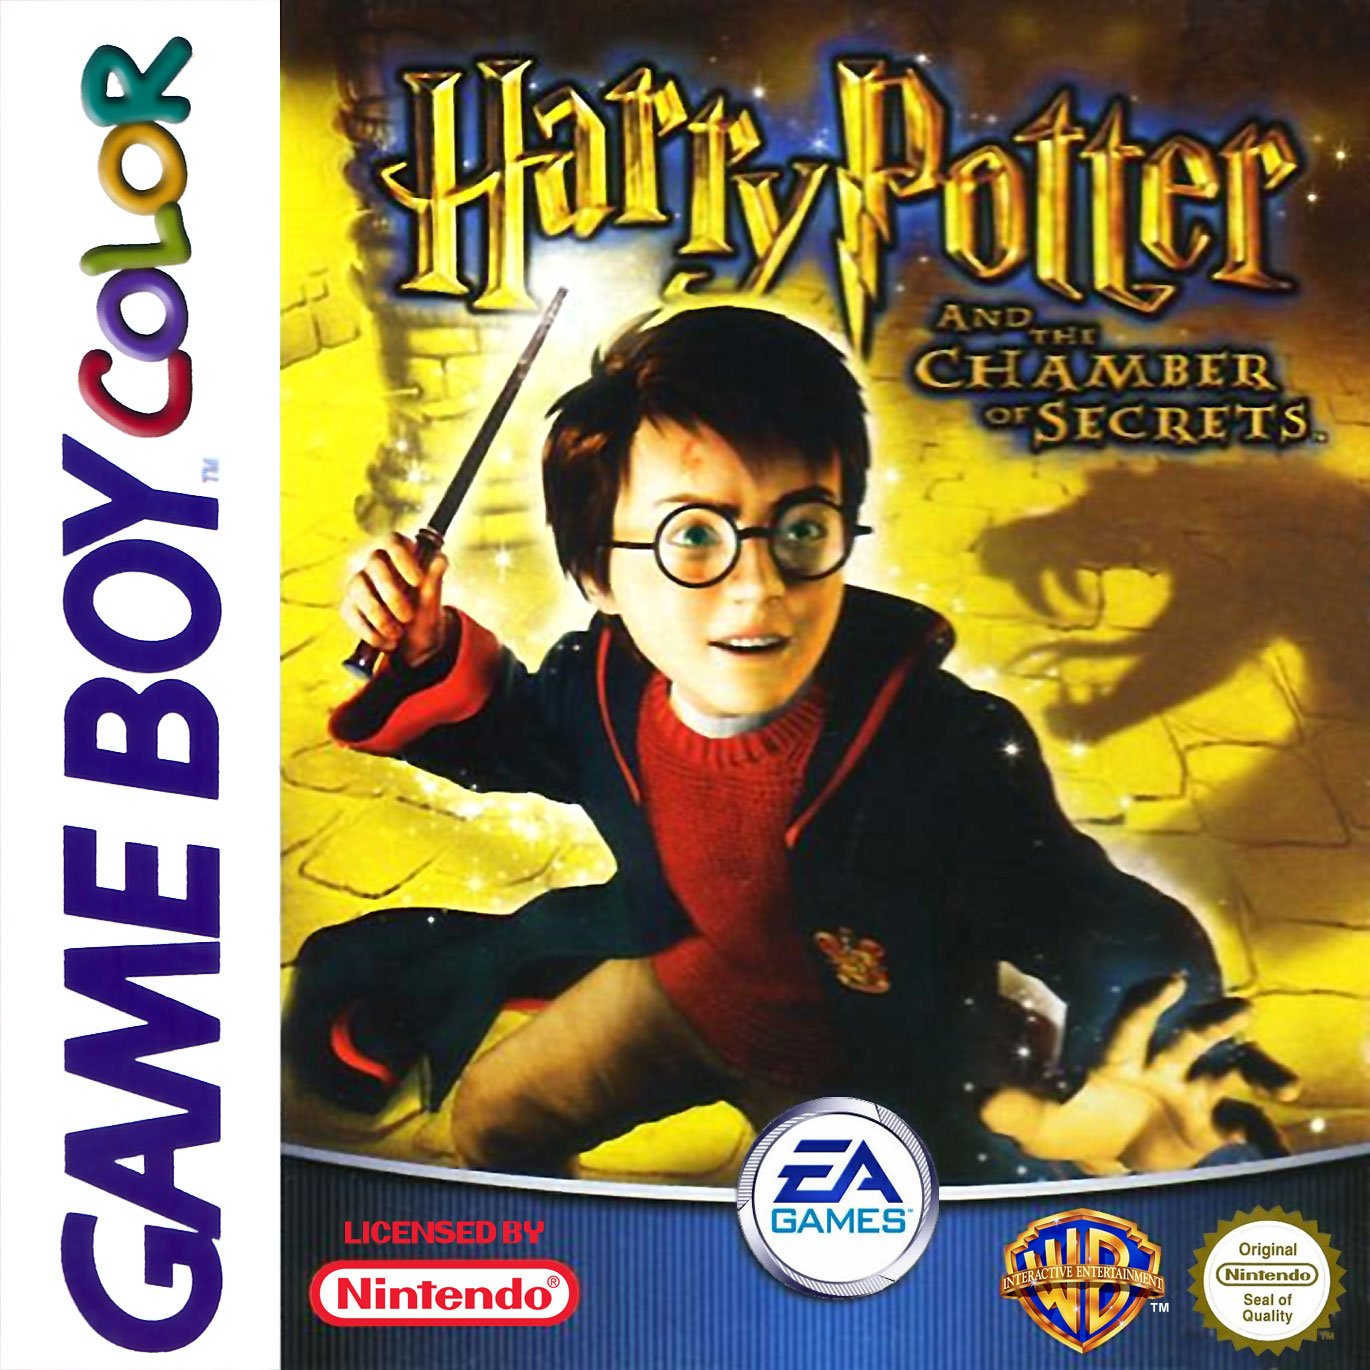 Caratula de Harry Potter and the Chamber of Secrets para Game Boy Color